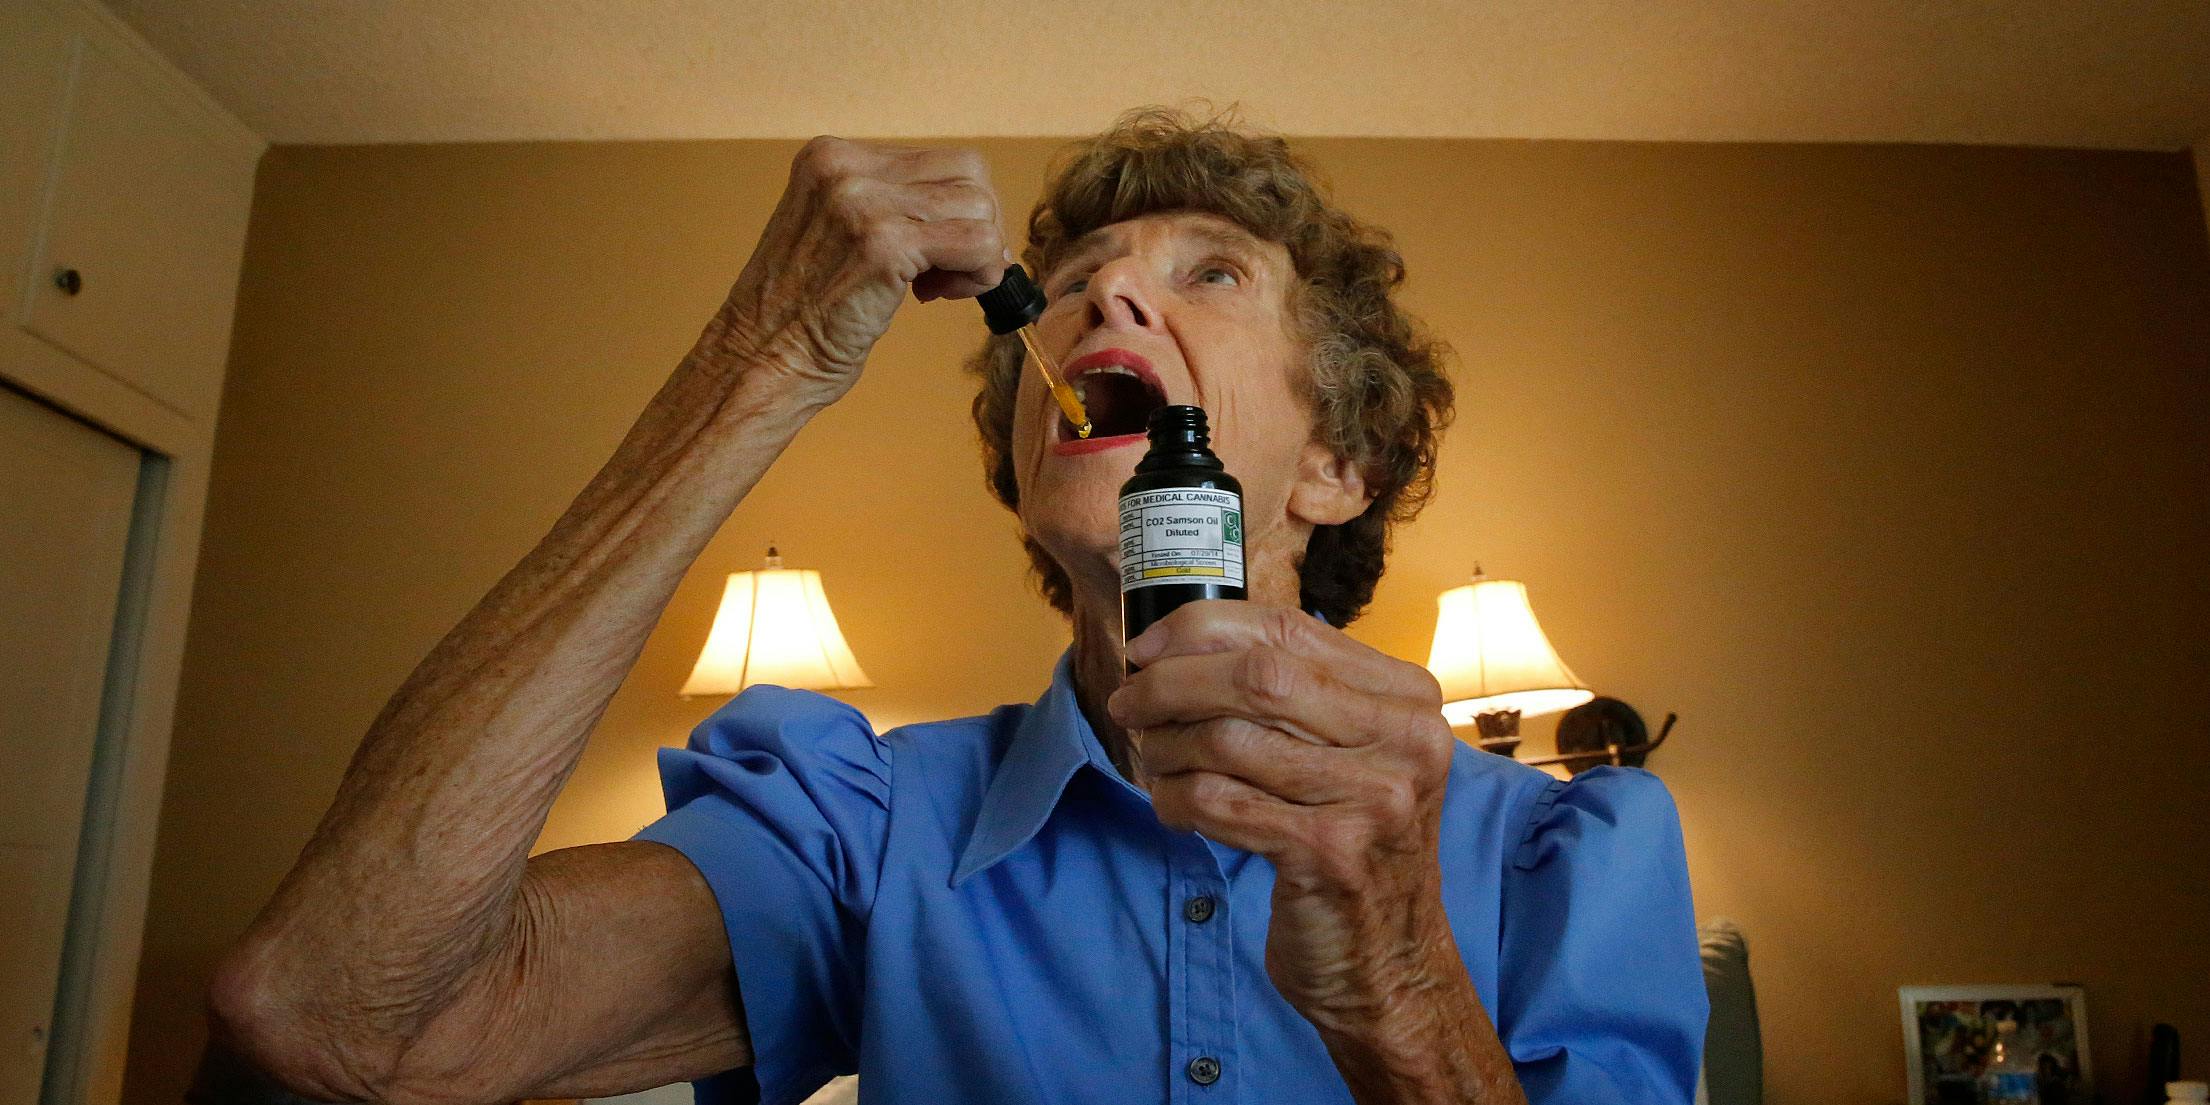 A senior takes a drop of medical marijuana under her tongue to help with pain relief. A recent Northwell survey found that 27 percent of seniors were able to forgo other forms of pain medication after using cannabis.